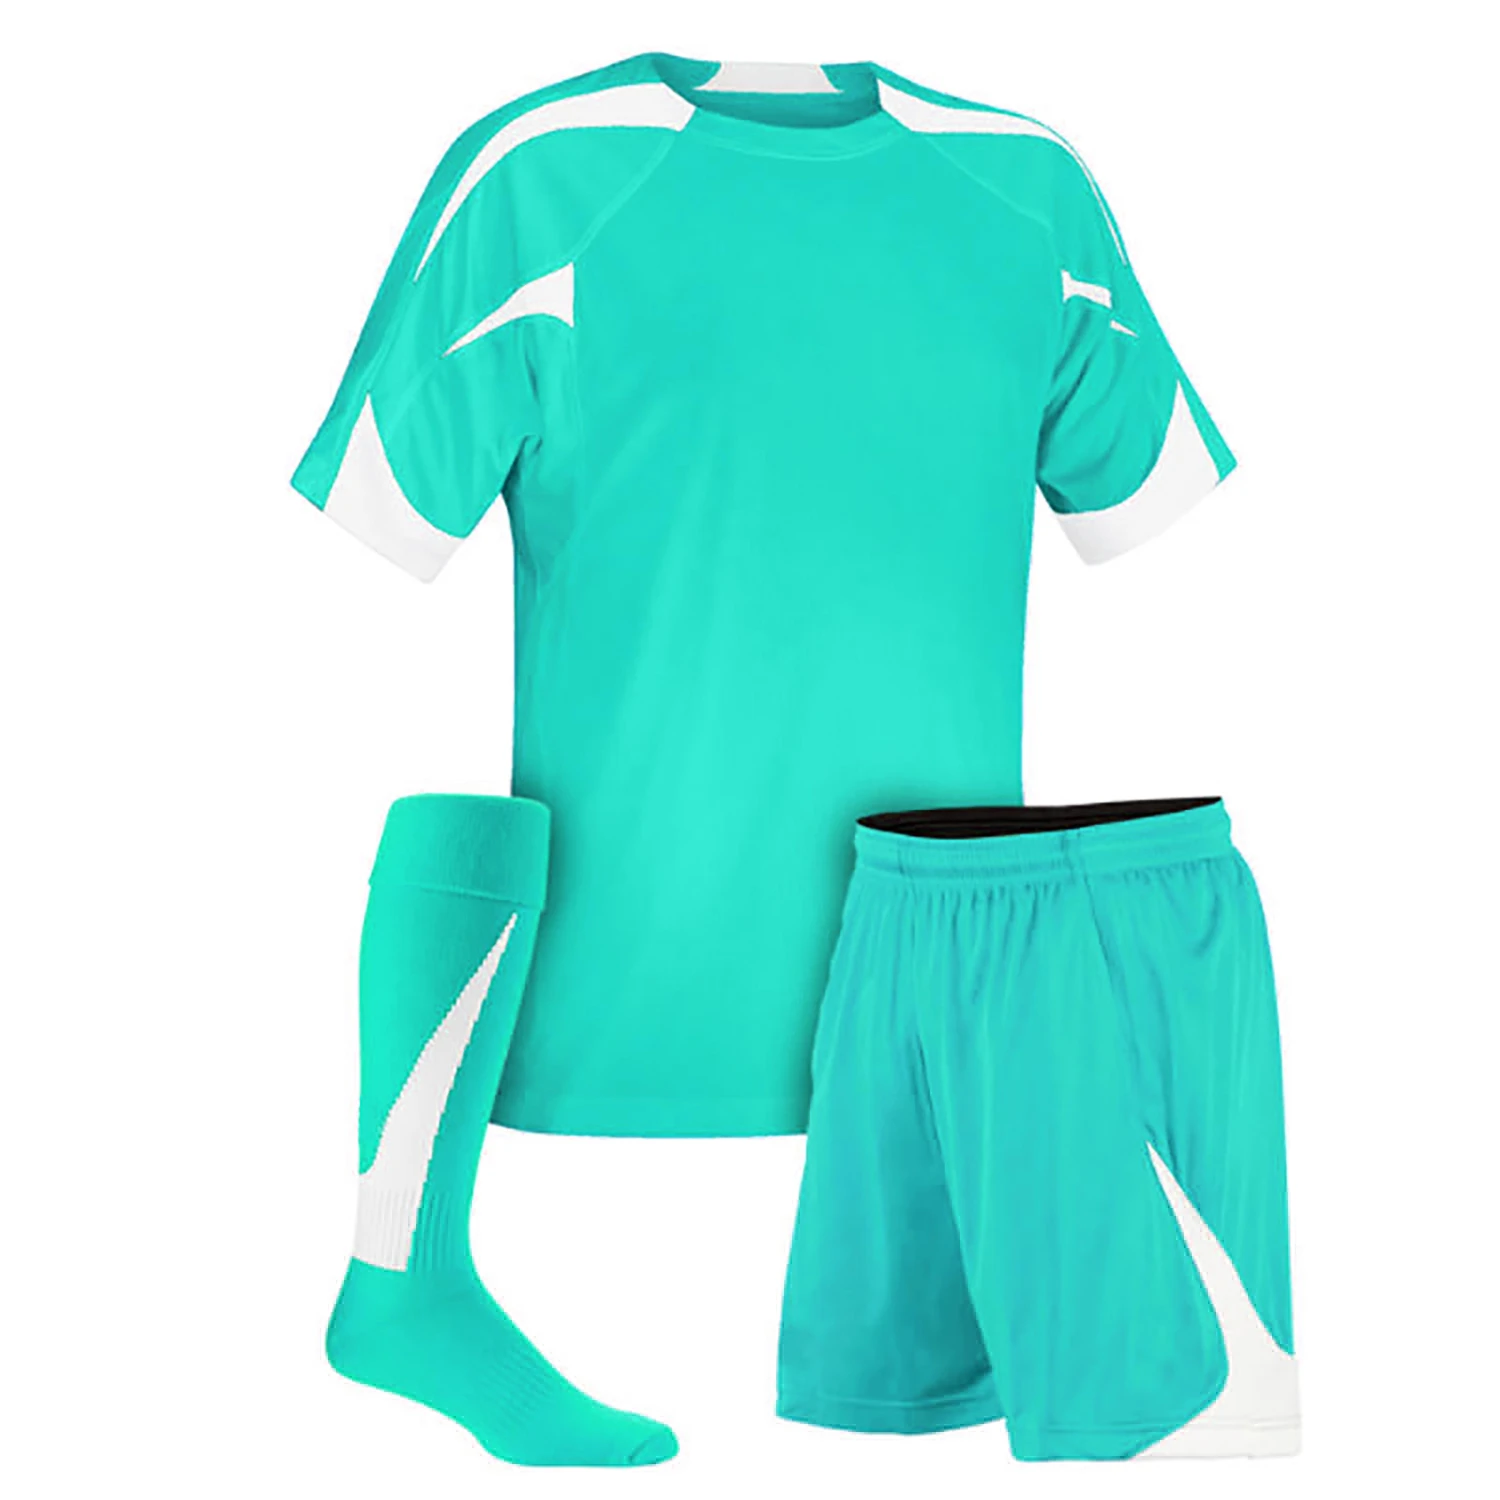 Custom Soccer Jerseys Men Football Uniforms Competition Training Suits Soccer Sets Soccer Uniforms Top Quality.